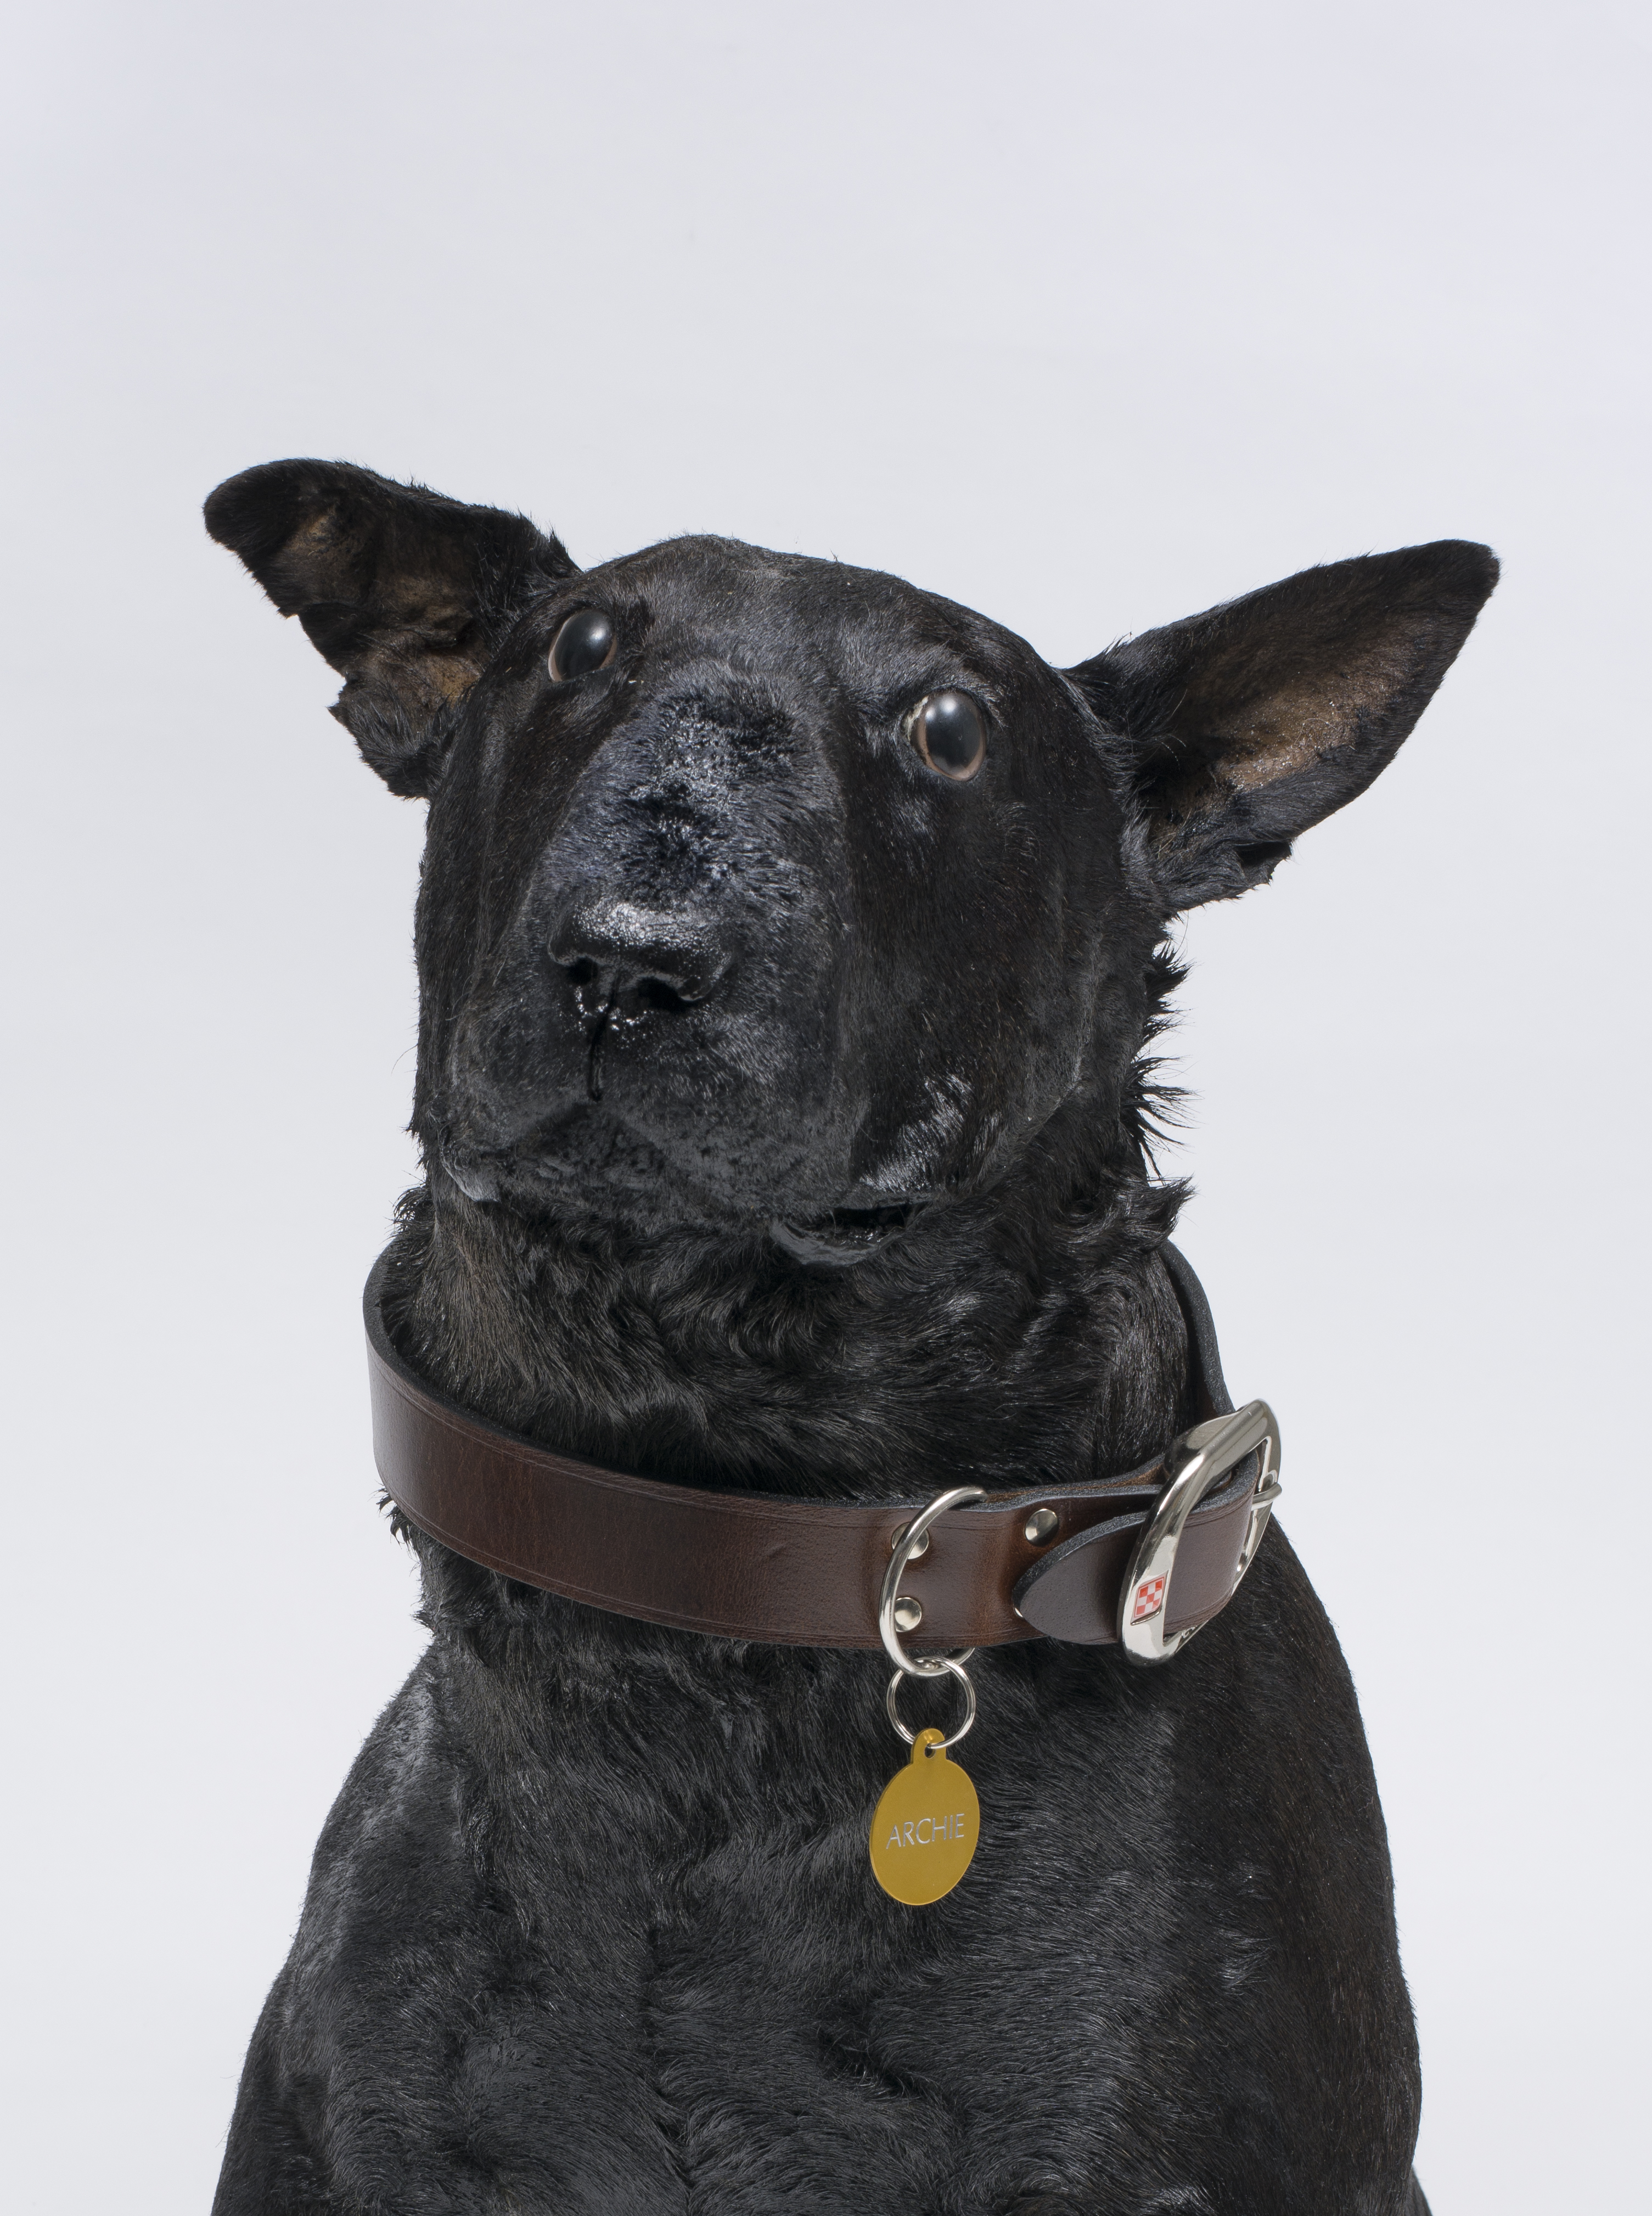 An artwork featuring a black taxidermied dog wearing a brown collar that reads "Archie".